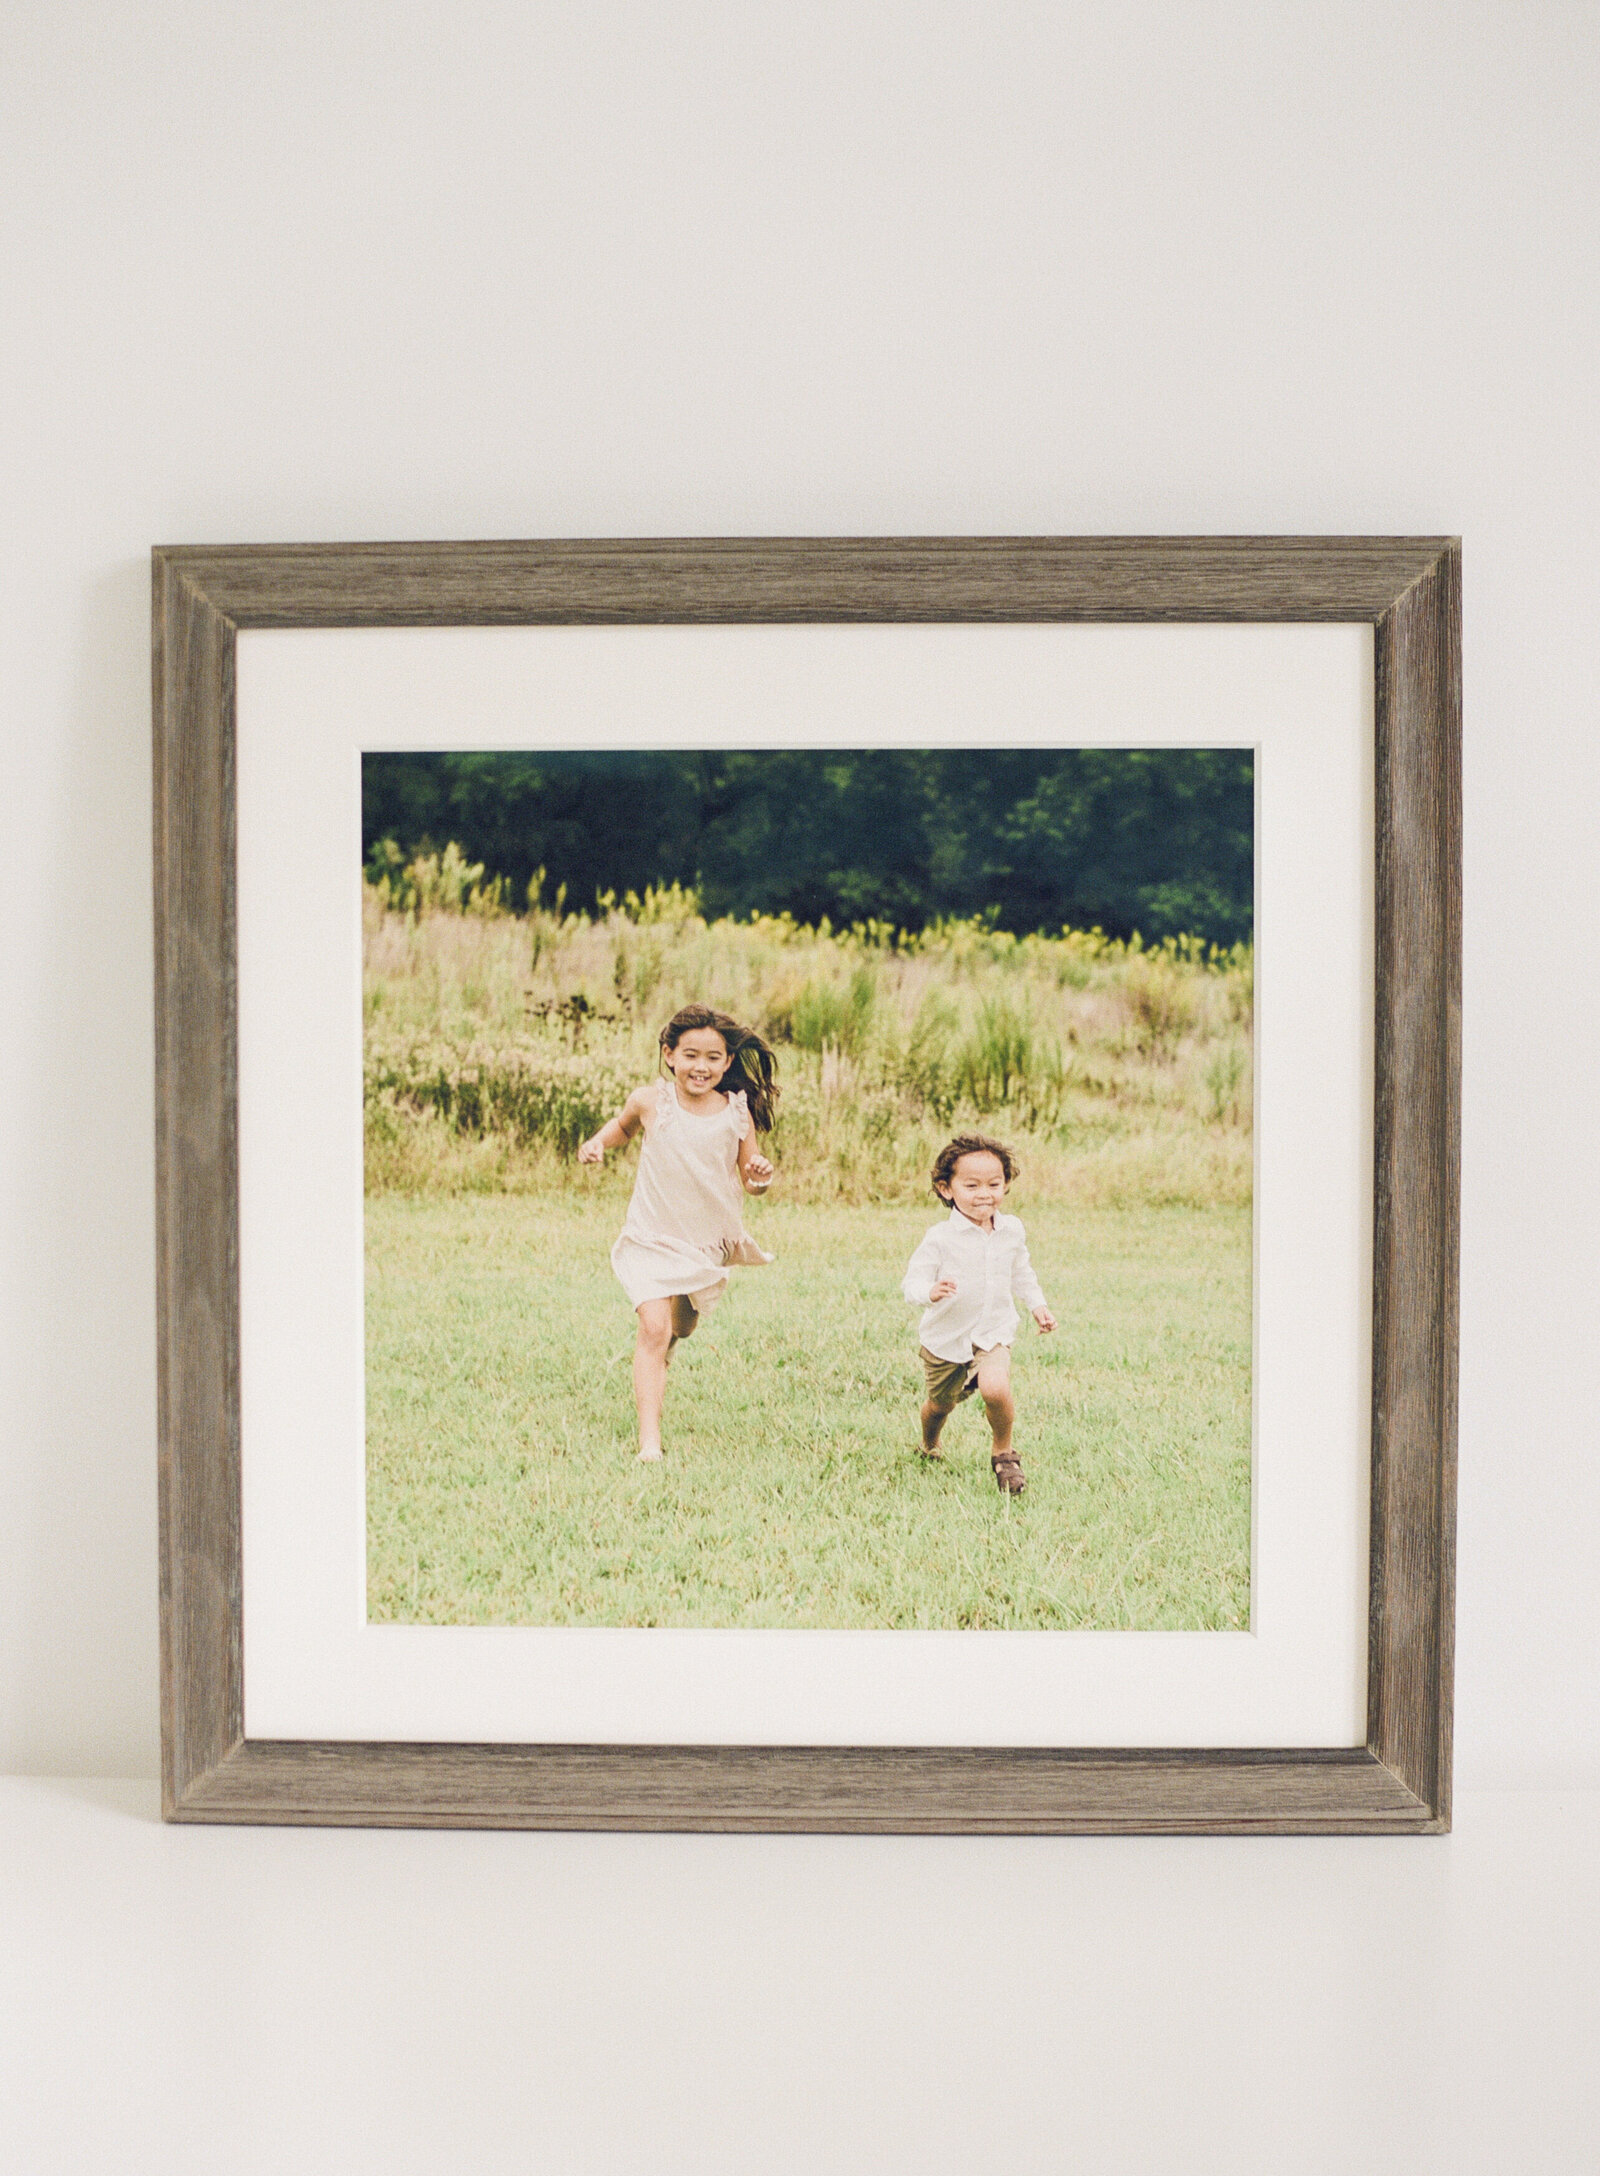 Framed wood portrait Photographed by Raleigh newborn photographers A.J. Dunlap Photography.